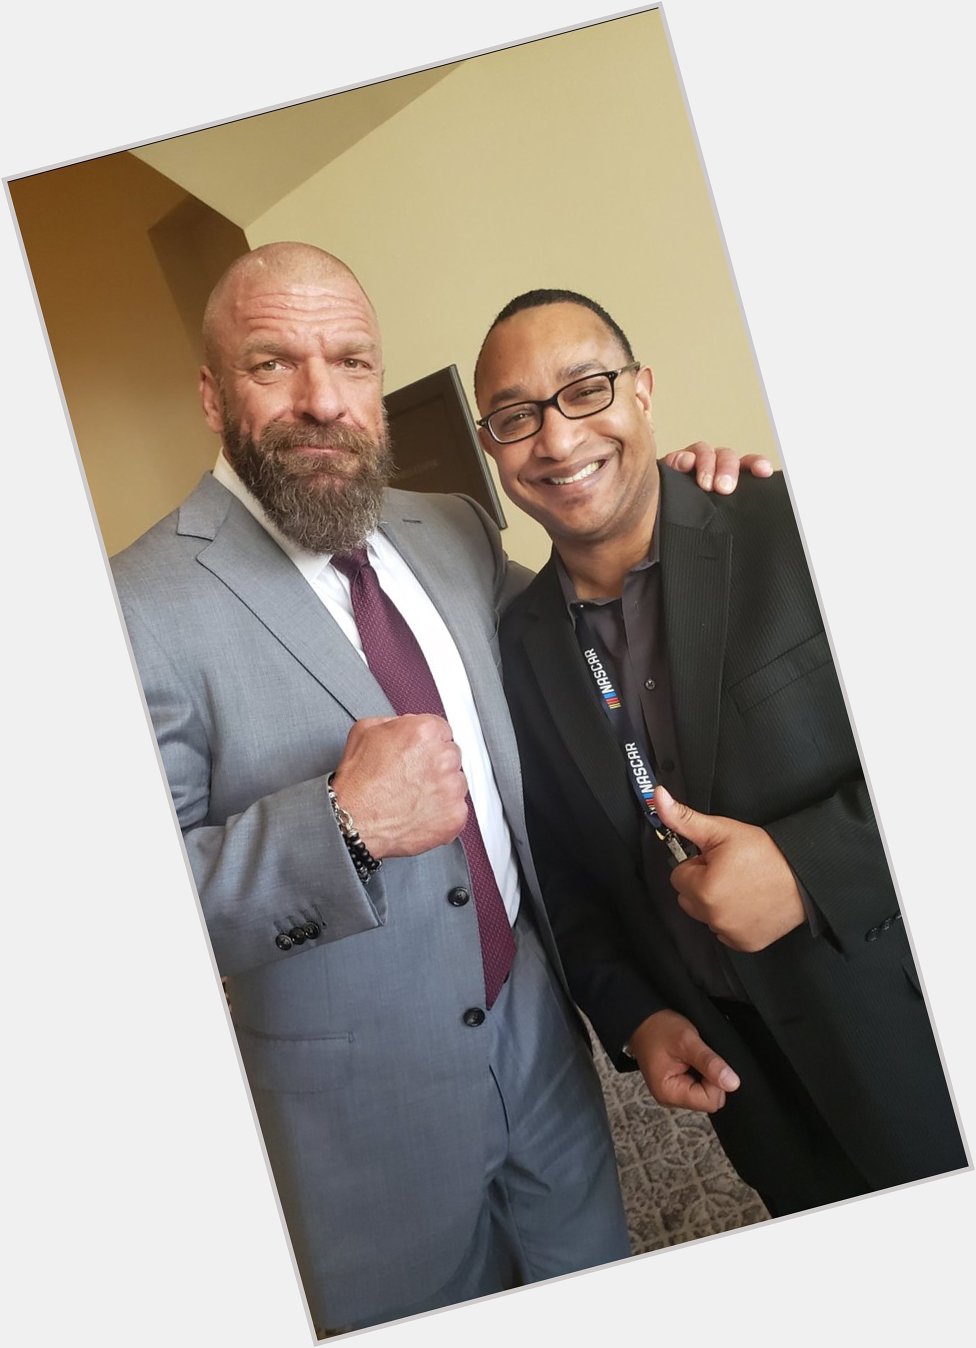 Happy Birthday to The Game, Triple H!

( by Steph McMahon. Monarch Beach Resort-World Congress of Sport, 2019) 